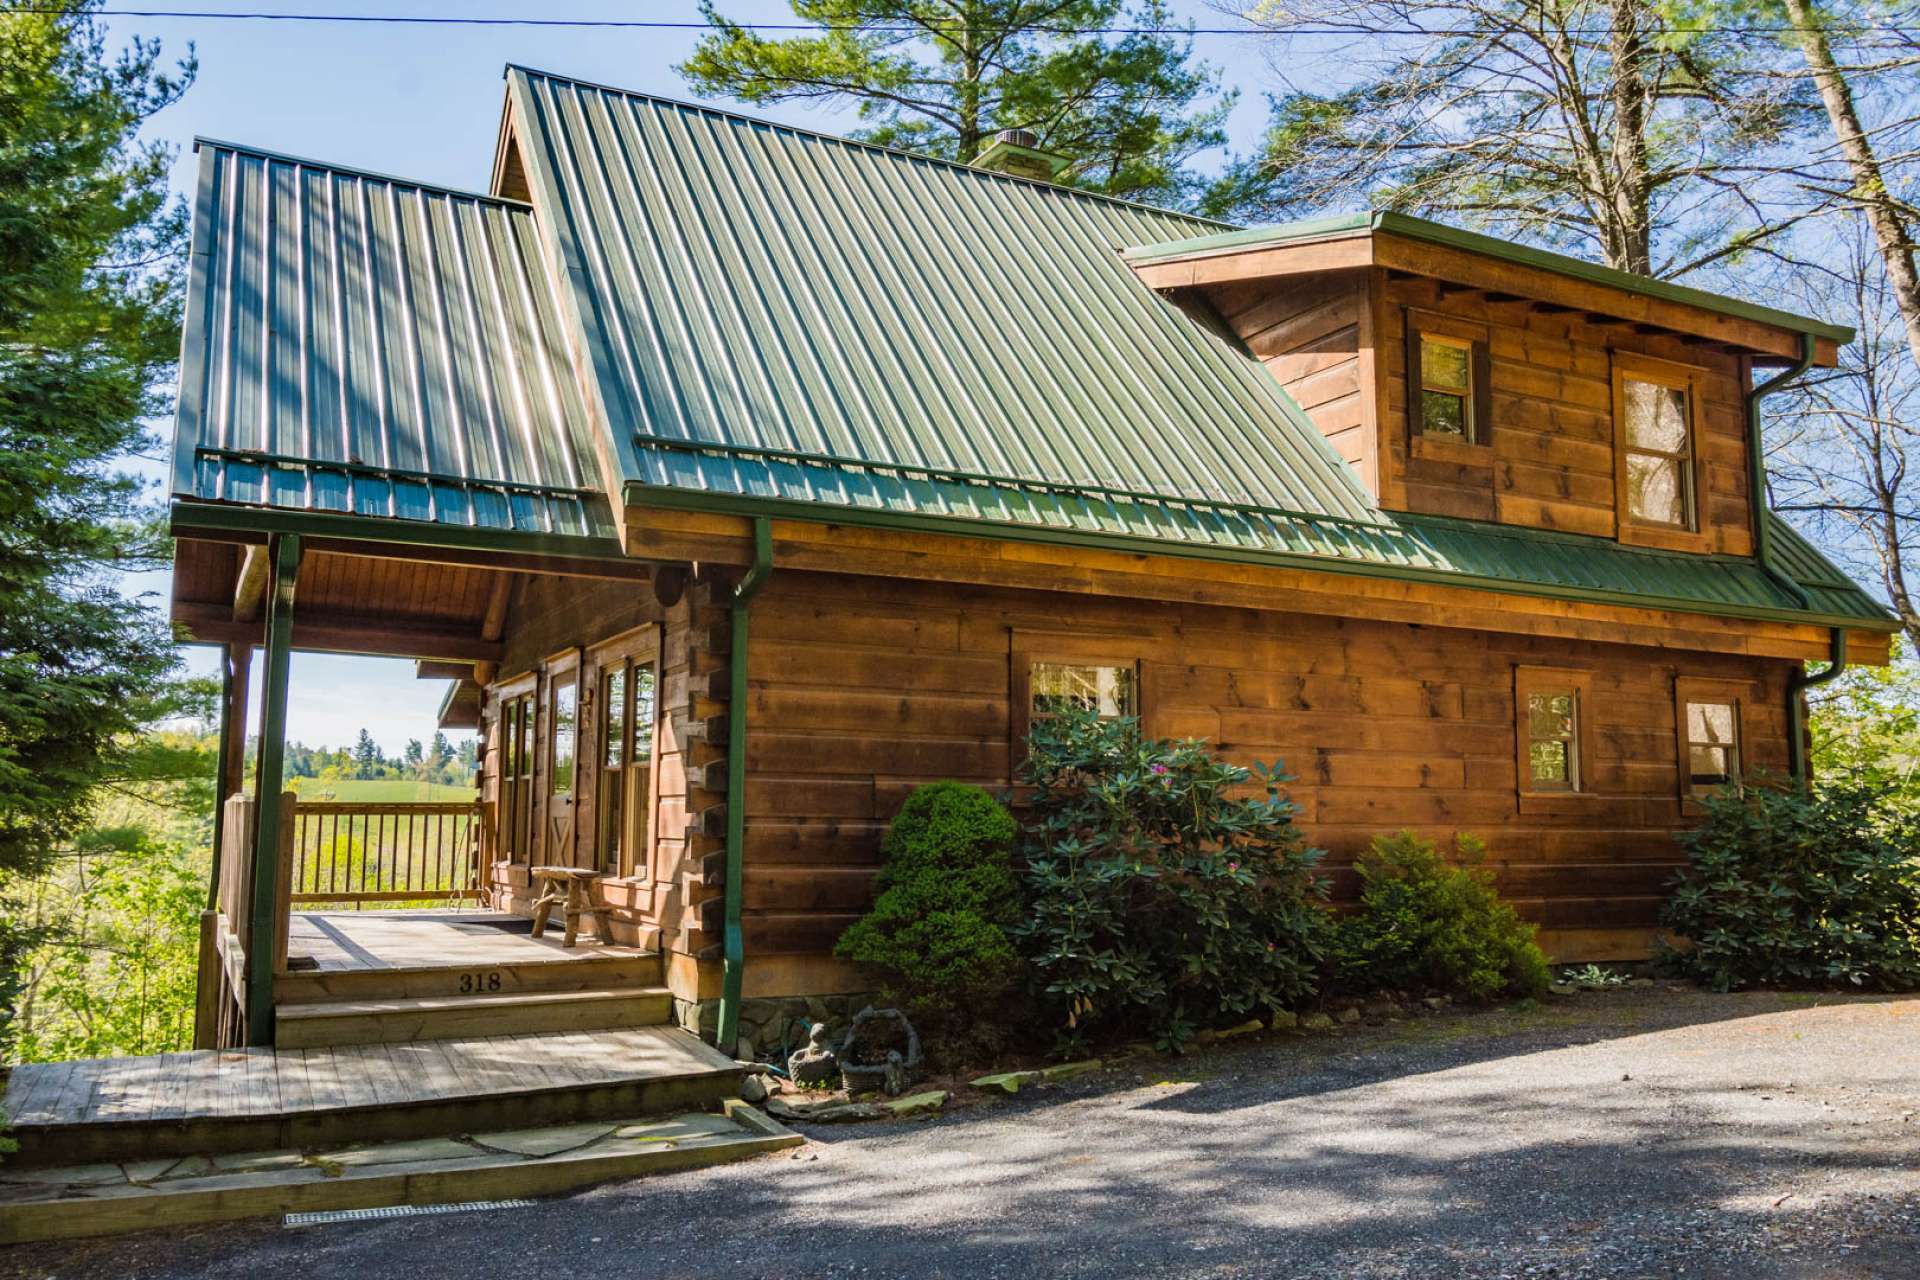 This sweet log cabin is hidden away in a wooded setting overlooking the New River and located within a short drive into downtown West Jefferson, Boone, and many high country destinations. The ideal option for your mountain and river retreat!